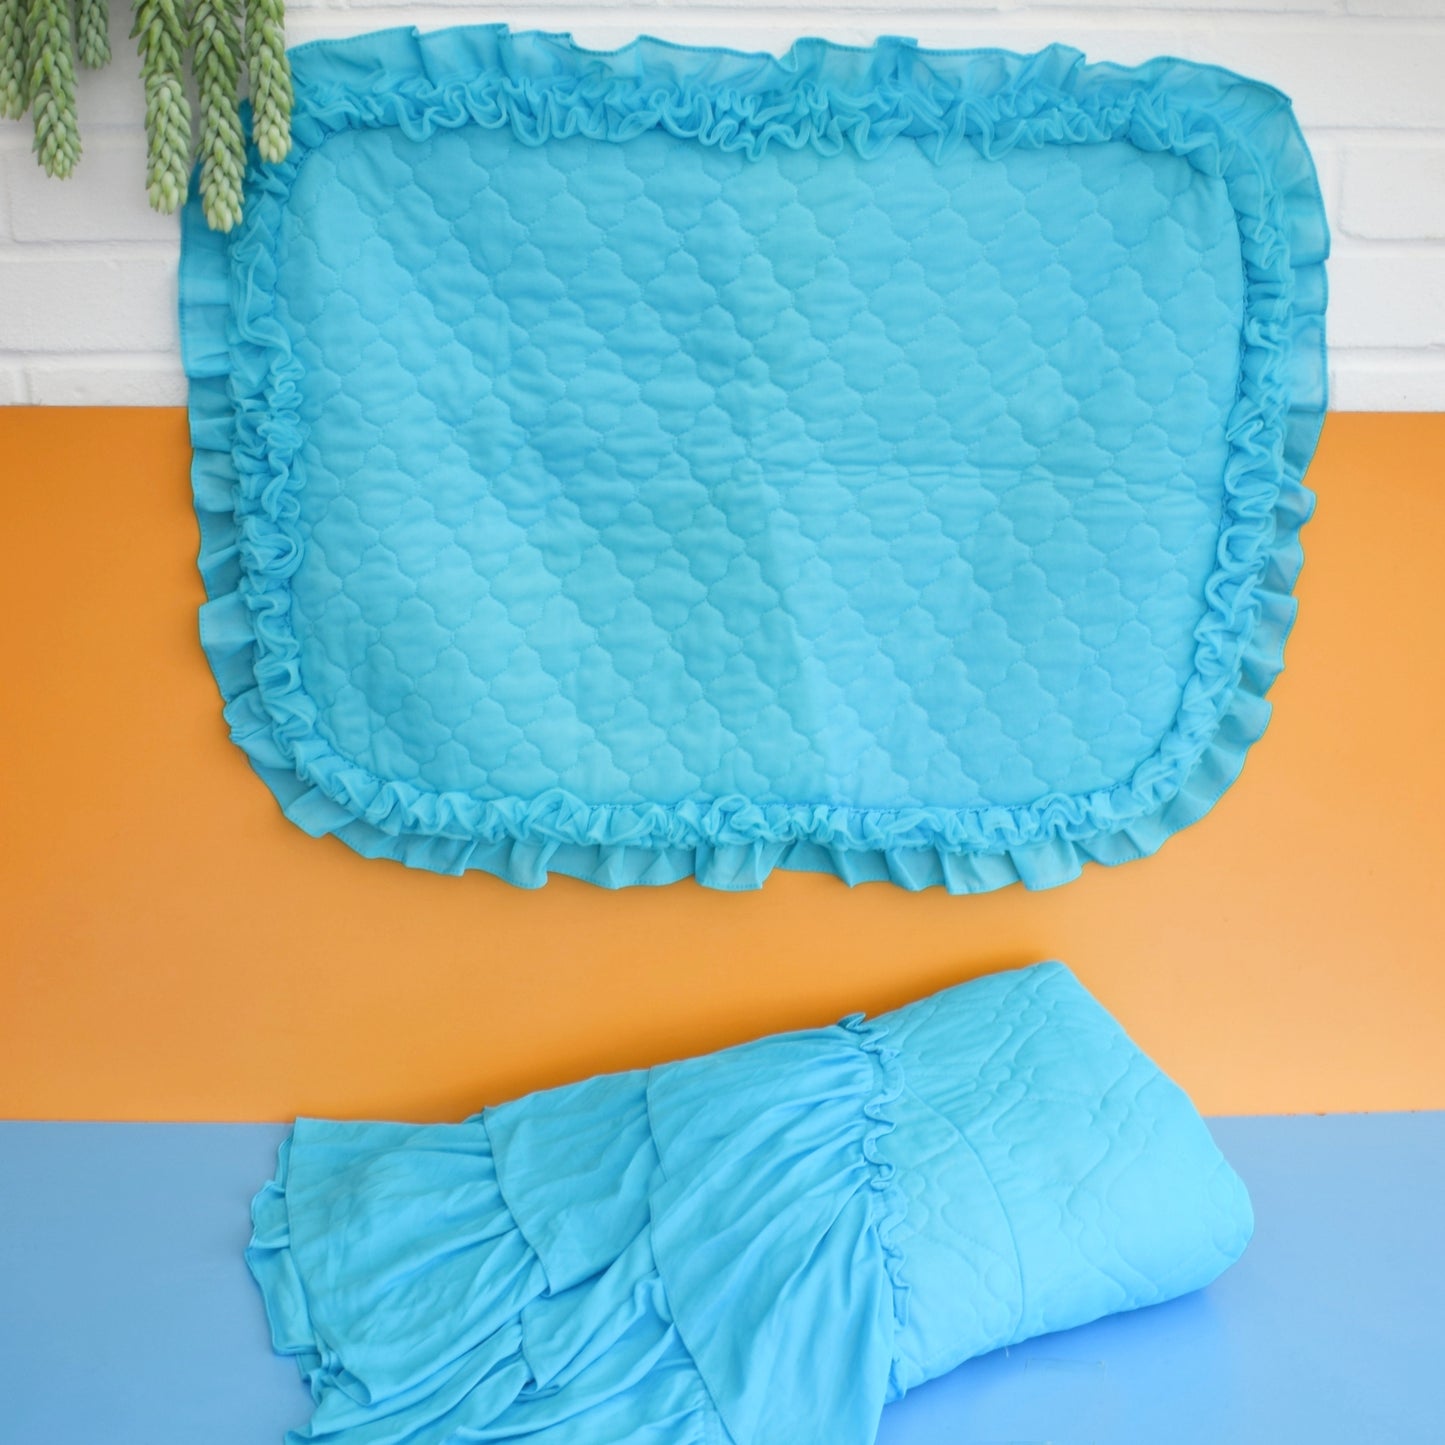 Vintage 1960s Double Bed Cover - Nylon Frill - Turquoise